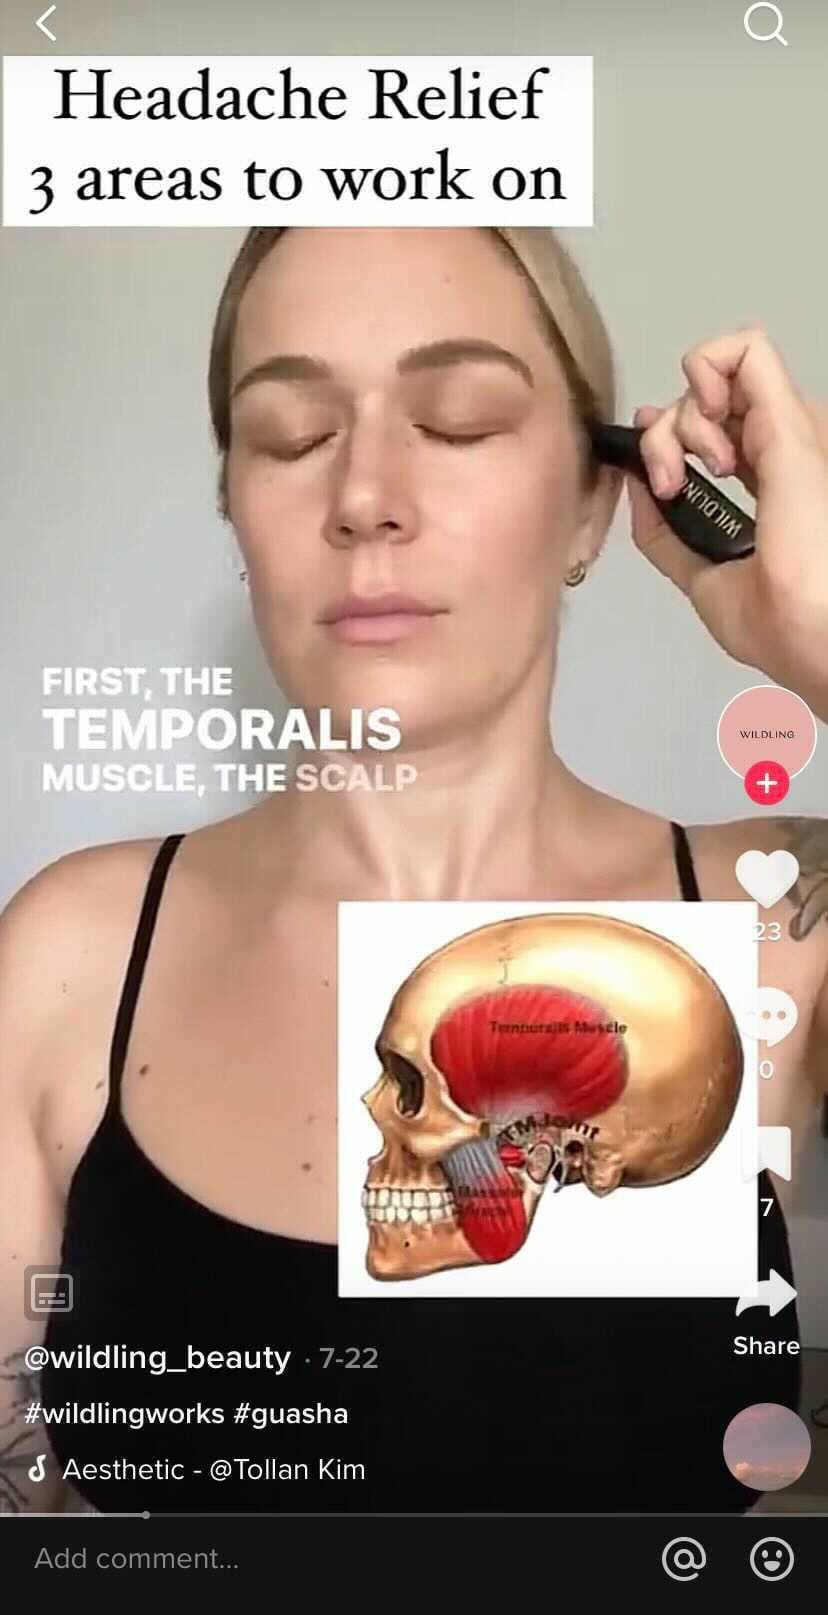 a wildling beauty tiktok video showing three areas to work on for headache relief